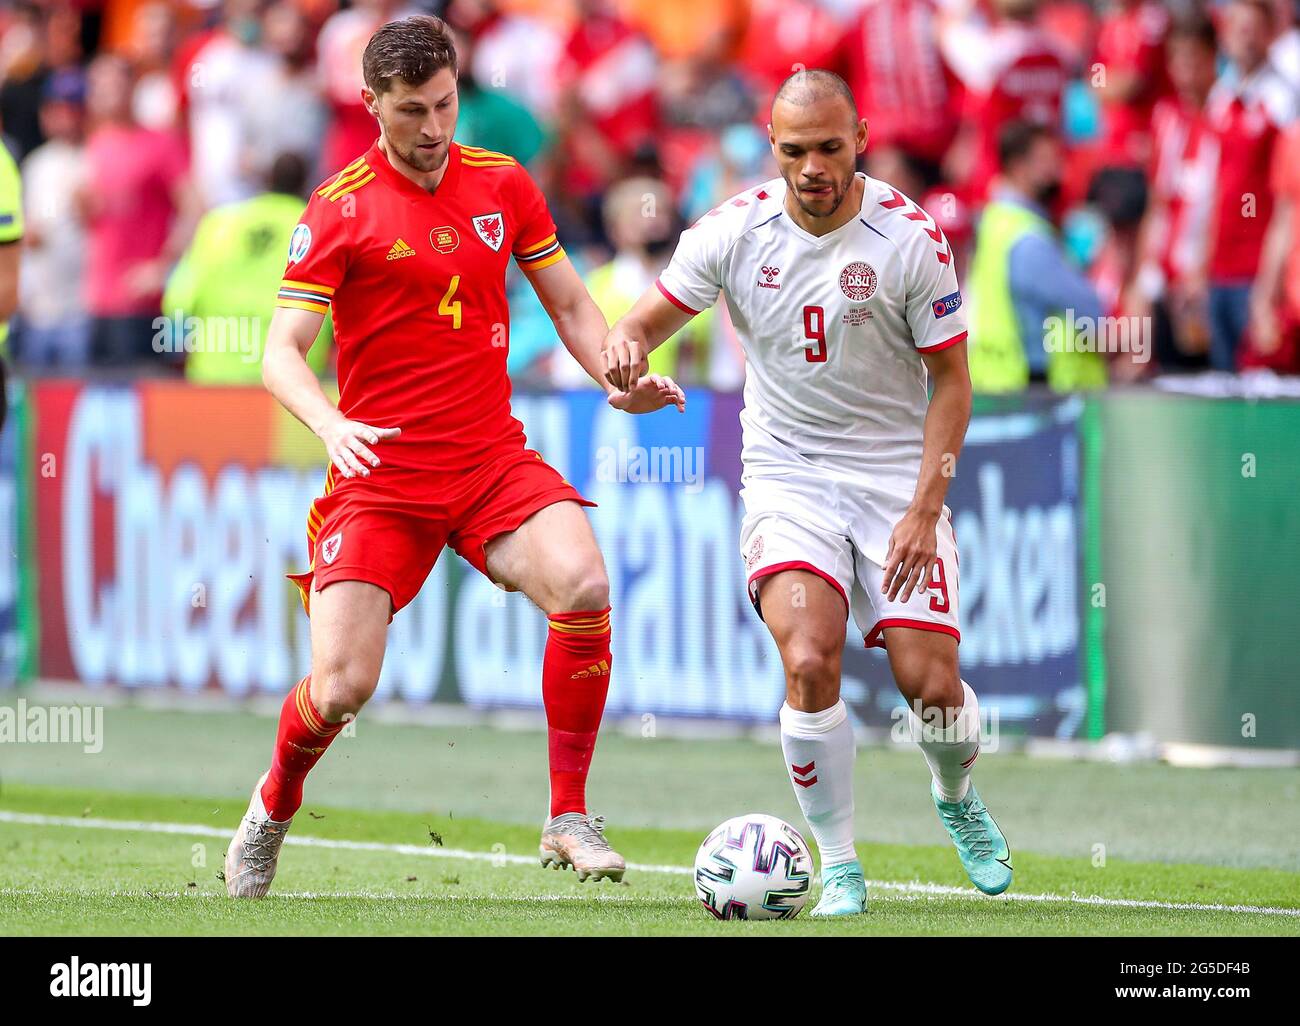 Wales' Ben Davies (left) and Denmark's Martin Braithwaite battle for the ball during the UEFA Euro 2020 round of 16 match held at the Johan Cruijff ArenA in Amsterdam, Netherlands. Picture date: Saturday June 26, 2021. Stock Photo